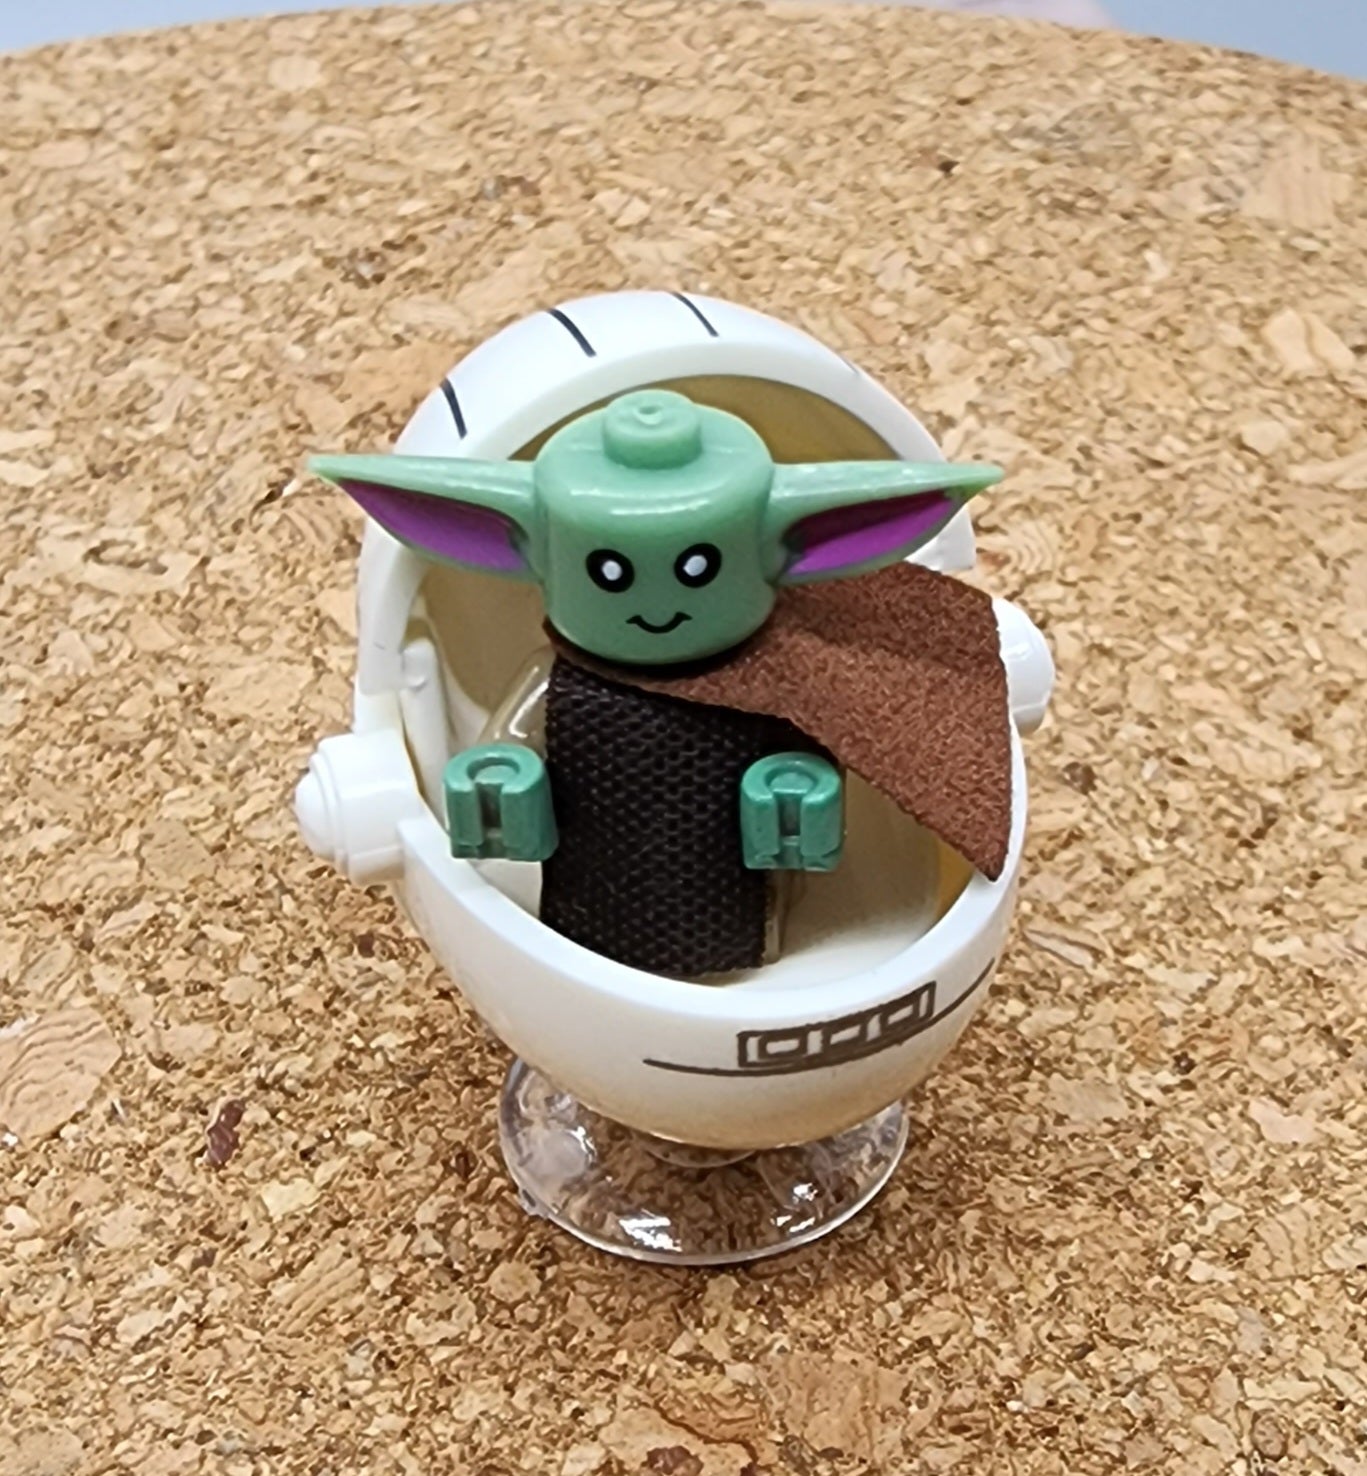 Baby Yoda Custom minifigure. Brand new in package. Please visit shop, lots more!